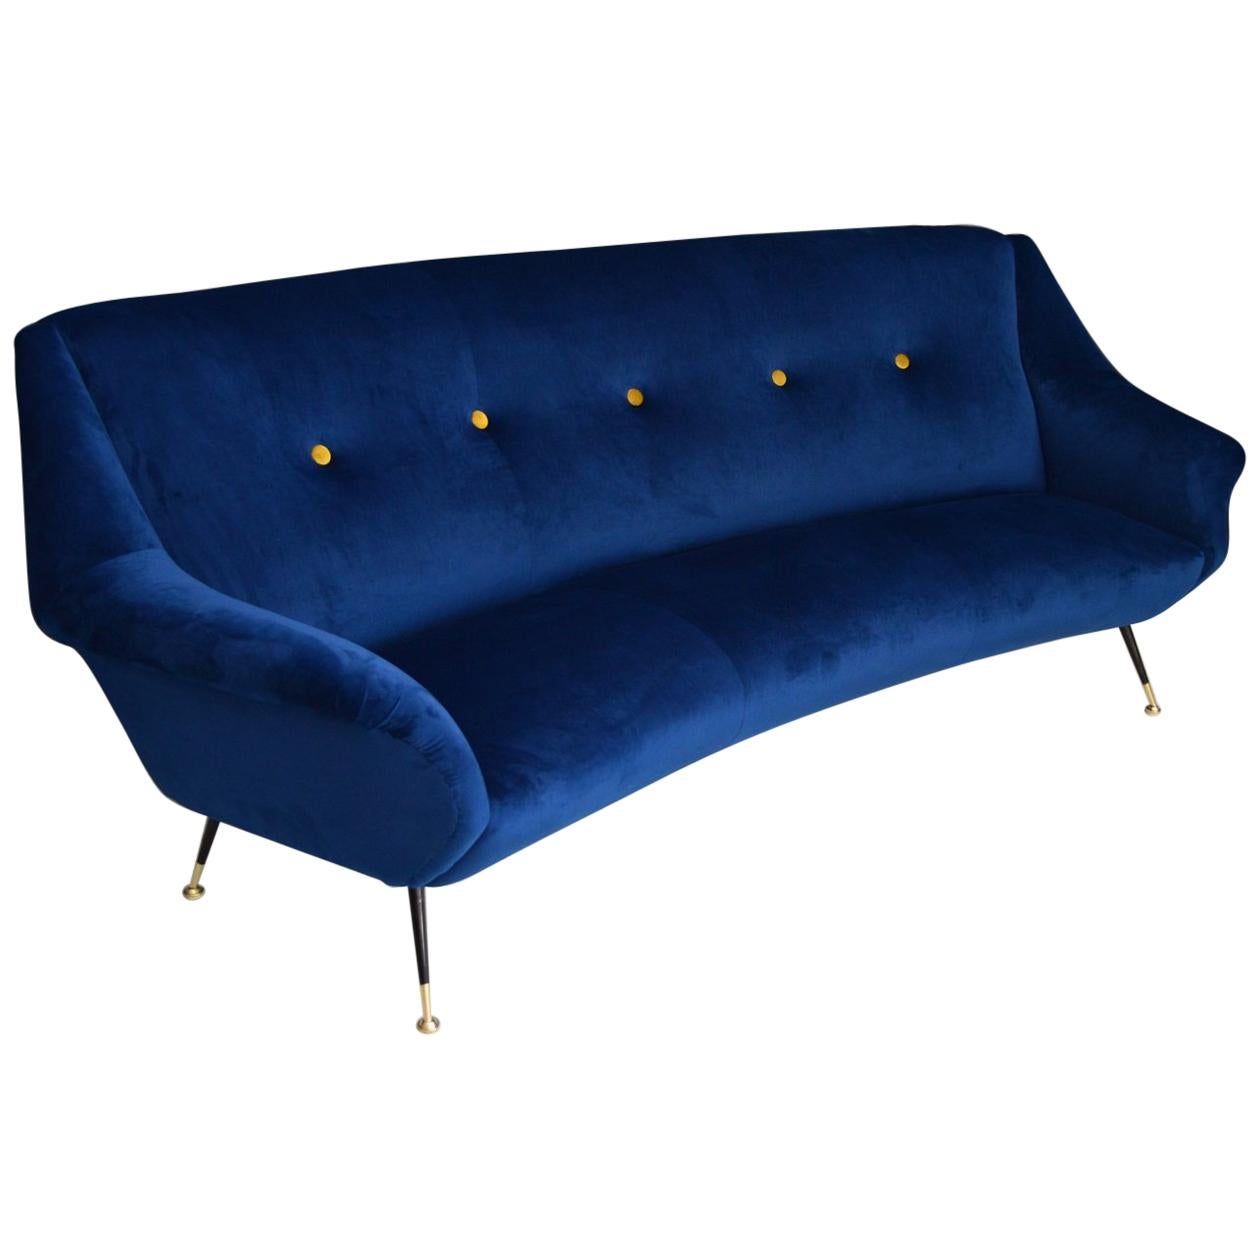 A magnificent round-shaped original sofa from the 1950s with the typical shape of the midcentury Italian sofas.
The sofa was completely gutted and completely restored with the best materials.
The outside was redone with soft Italian royal blue